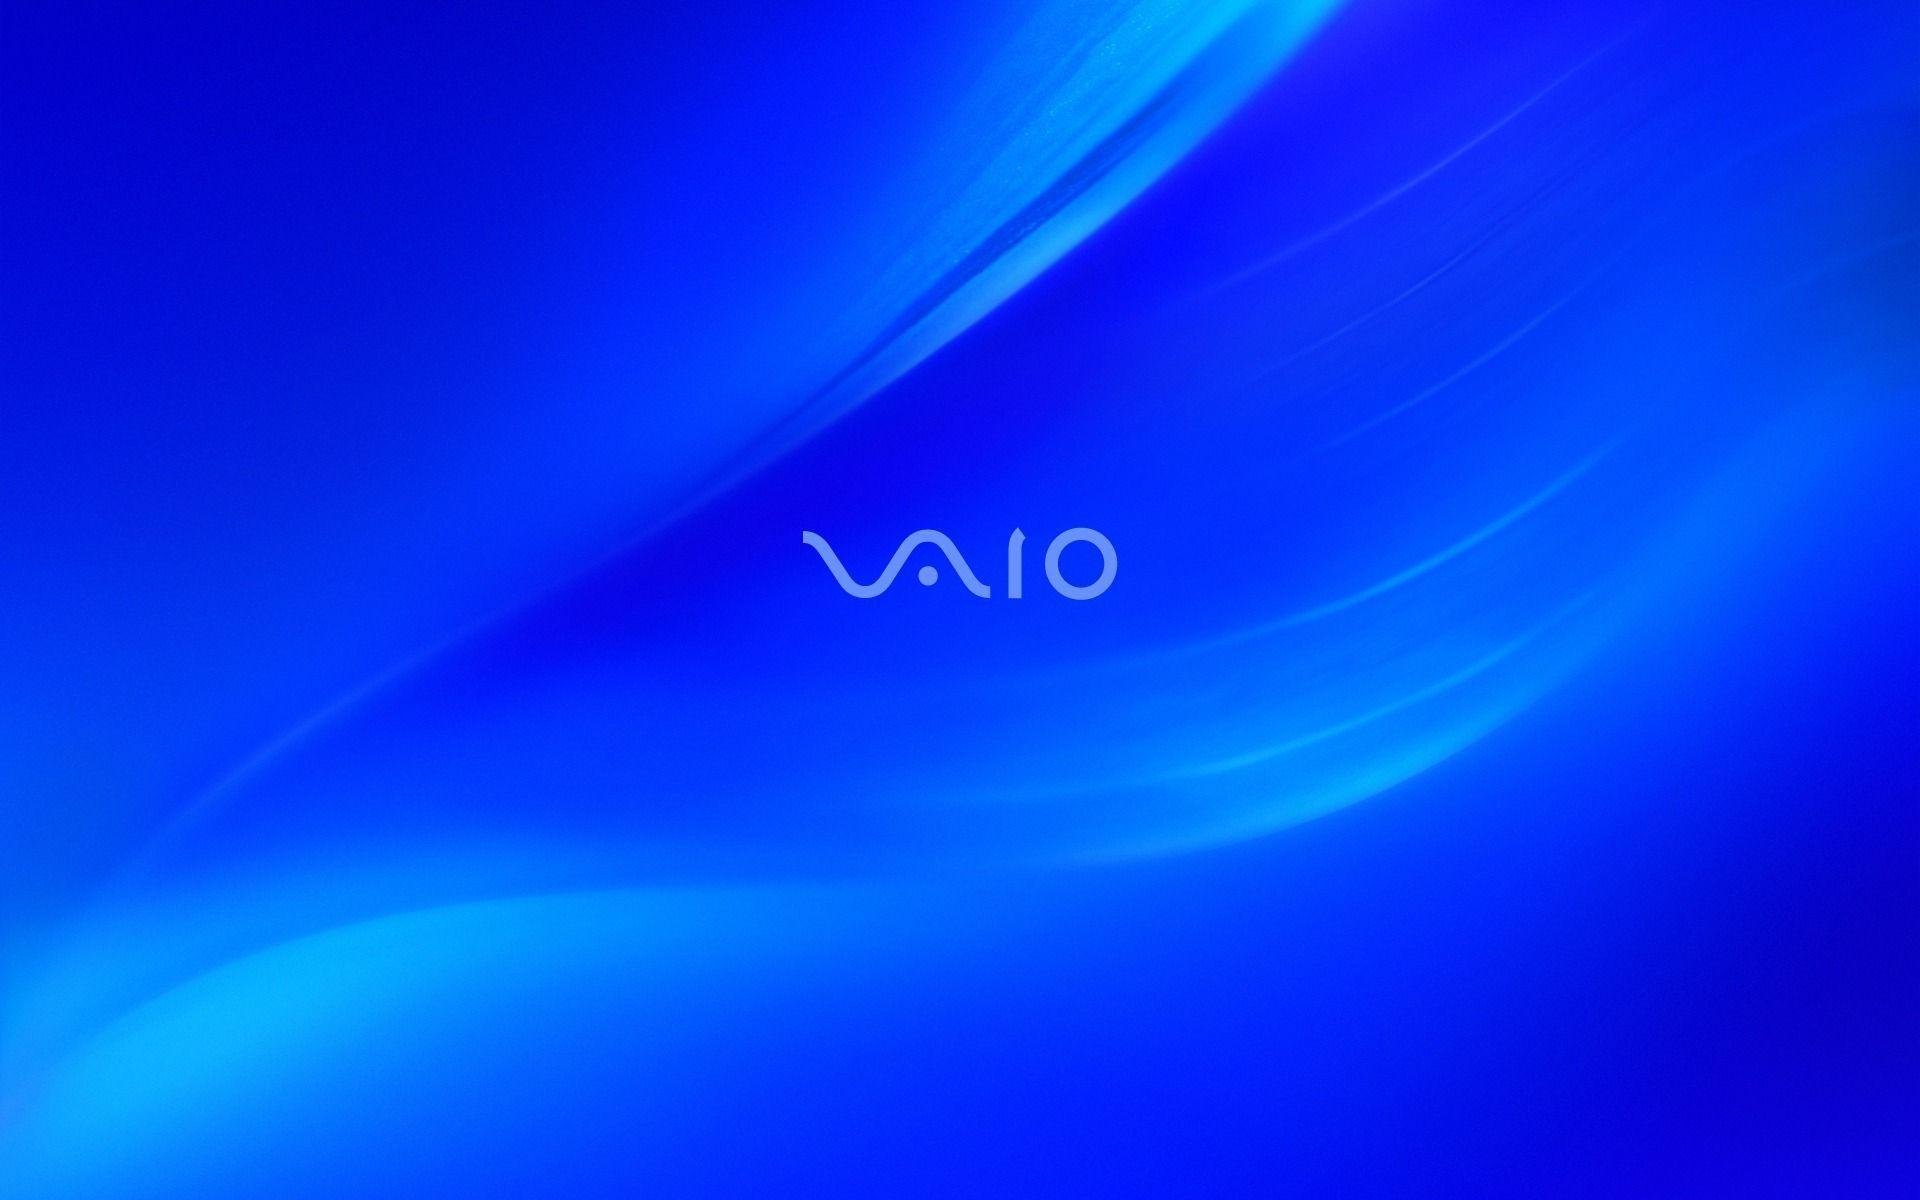 Sony vaio wallpapers